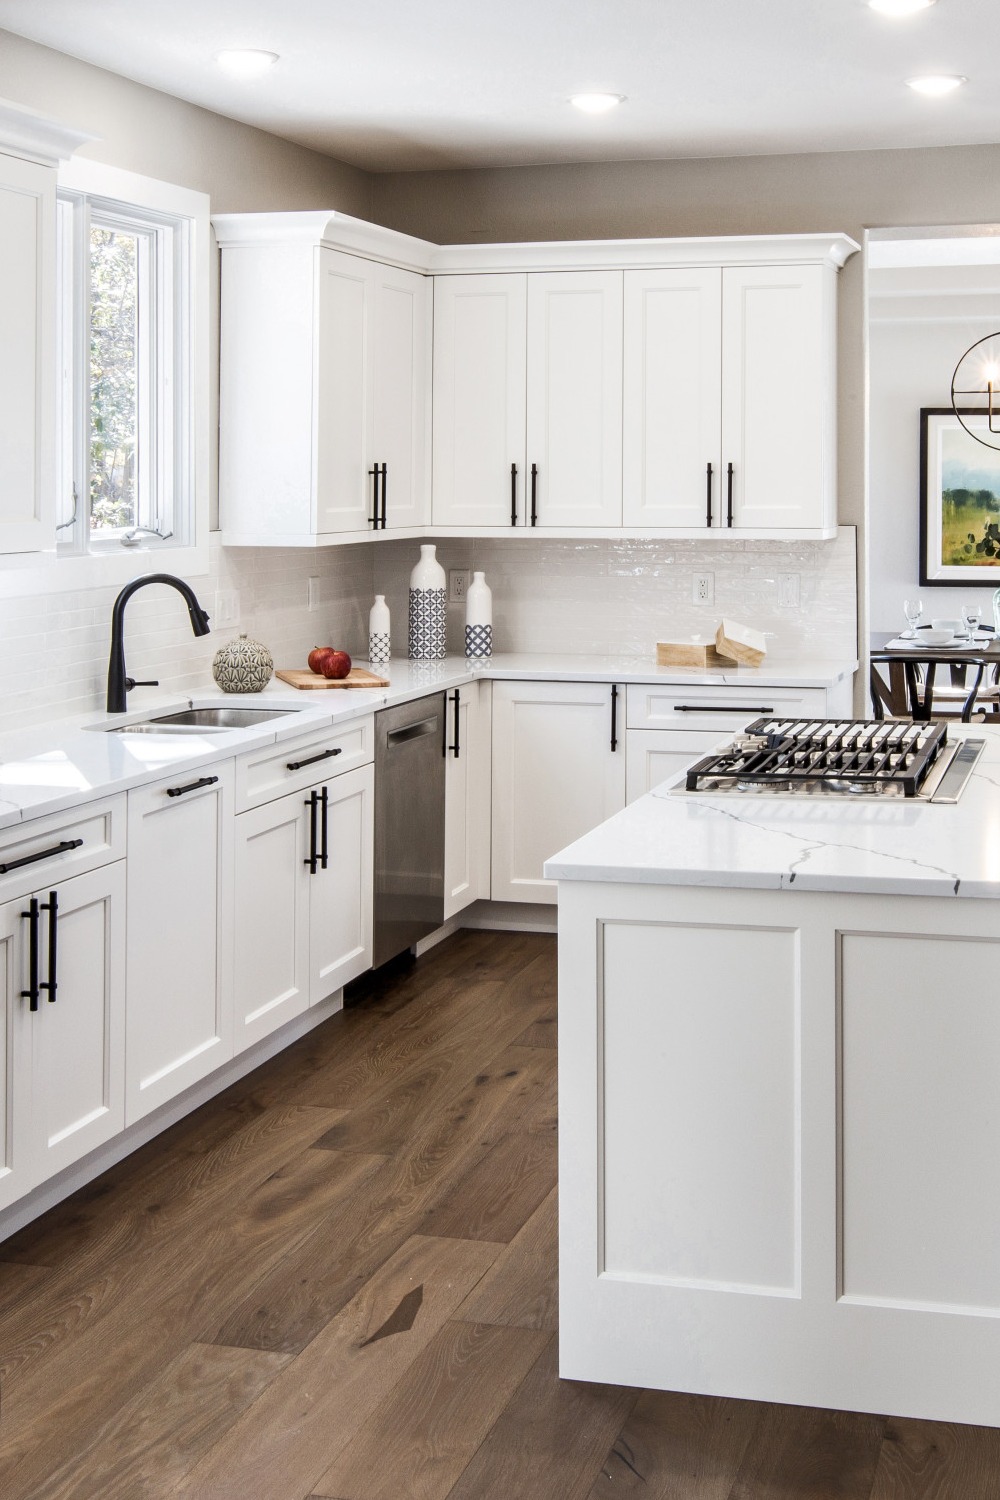 Quartz Countertops White Cabinets Space White Kitchen Durable Material Cool Tones Cabinetry